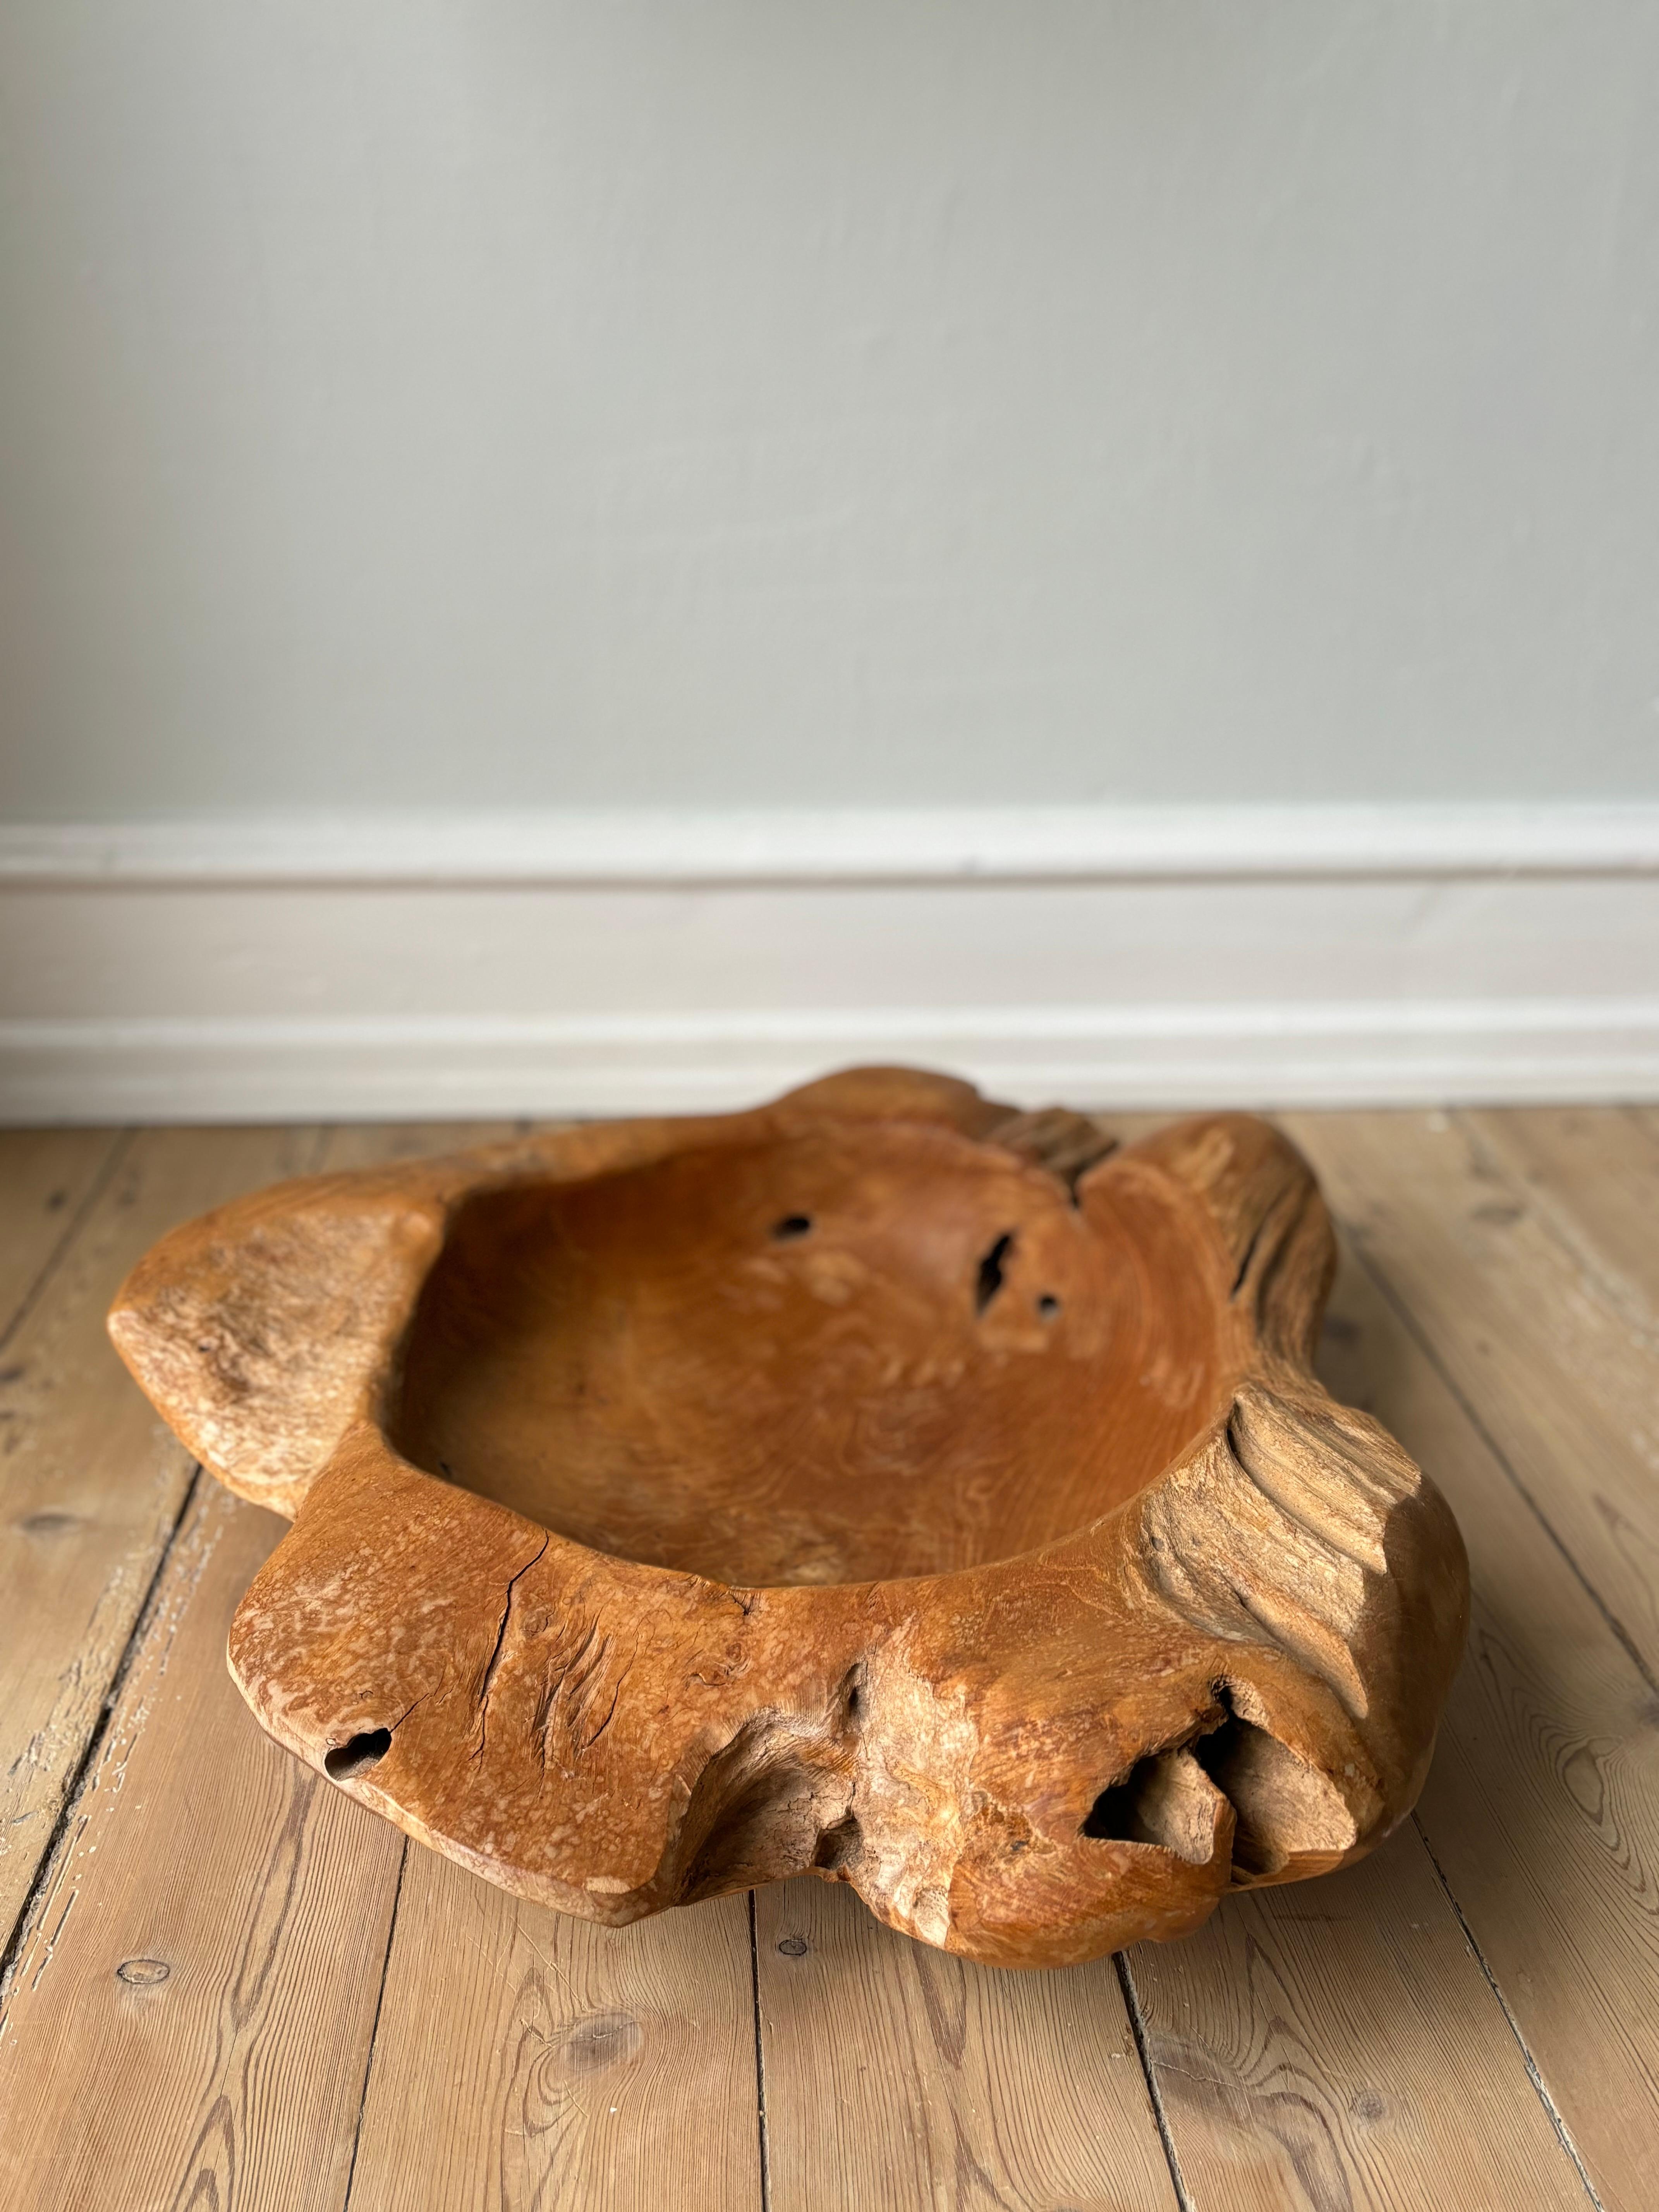 X-Large Vintage French Olive Wood Bowl, Early 20th Century For Sale 1